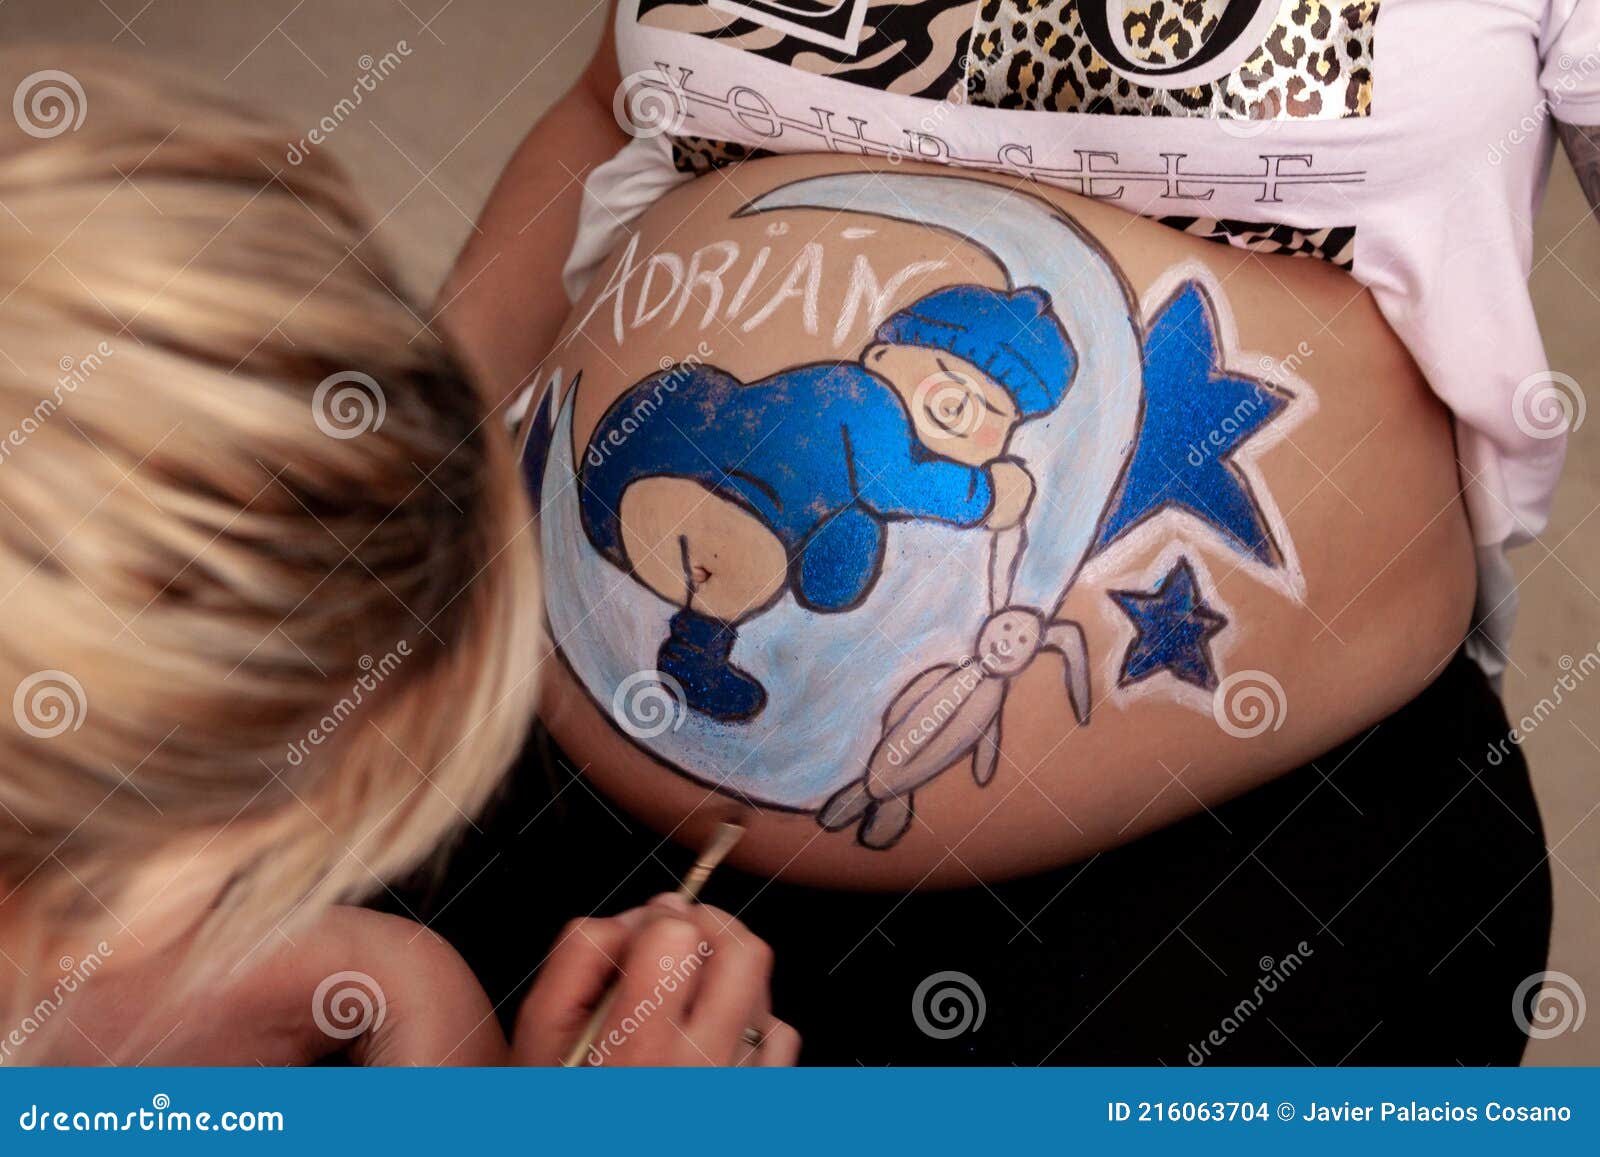 Body paint pics 2 579 Bodypaint Photos Free Royalty Free Stock Photos From Dreamstime